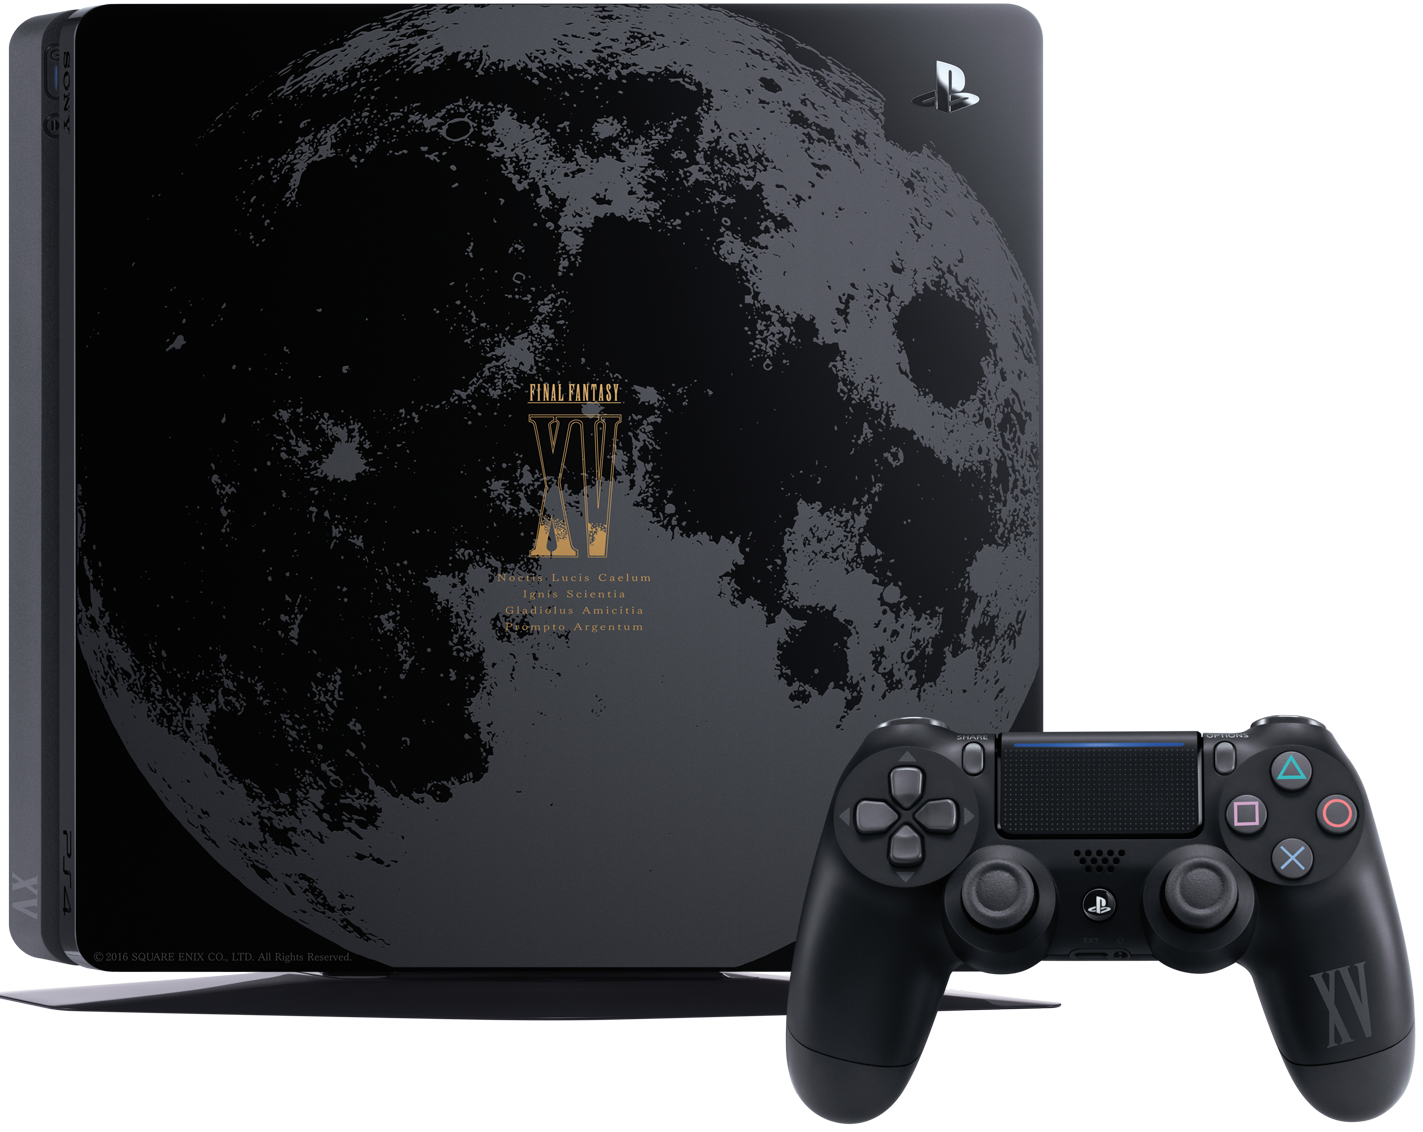 Sony unveils Limited Deluxe Edition Final Fantasy XV PS4 bundle, yours for $449